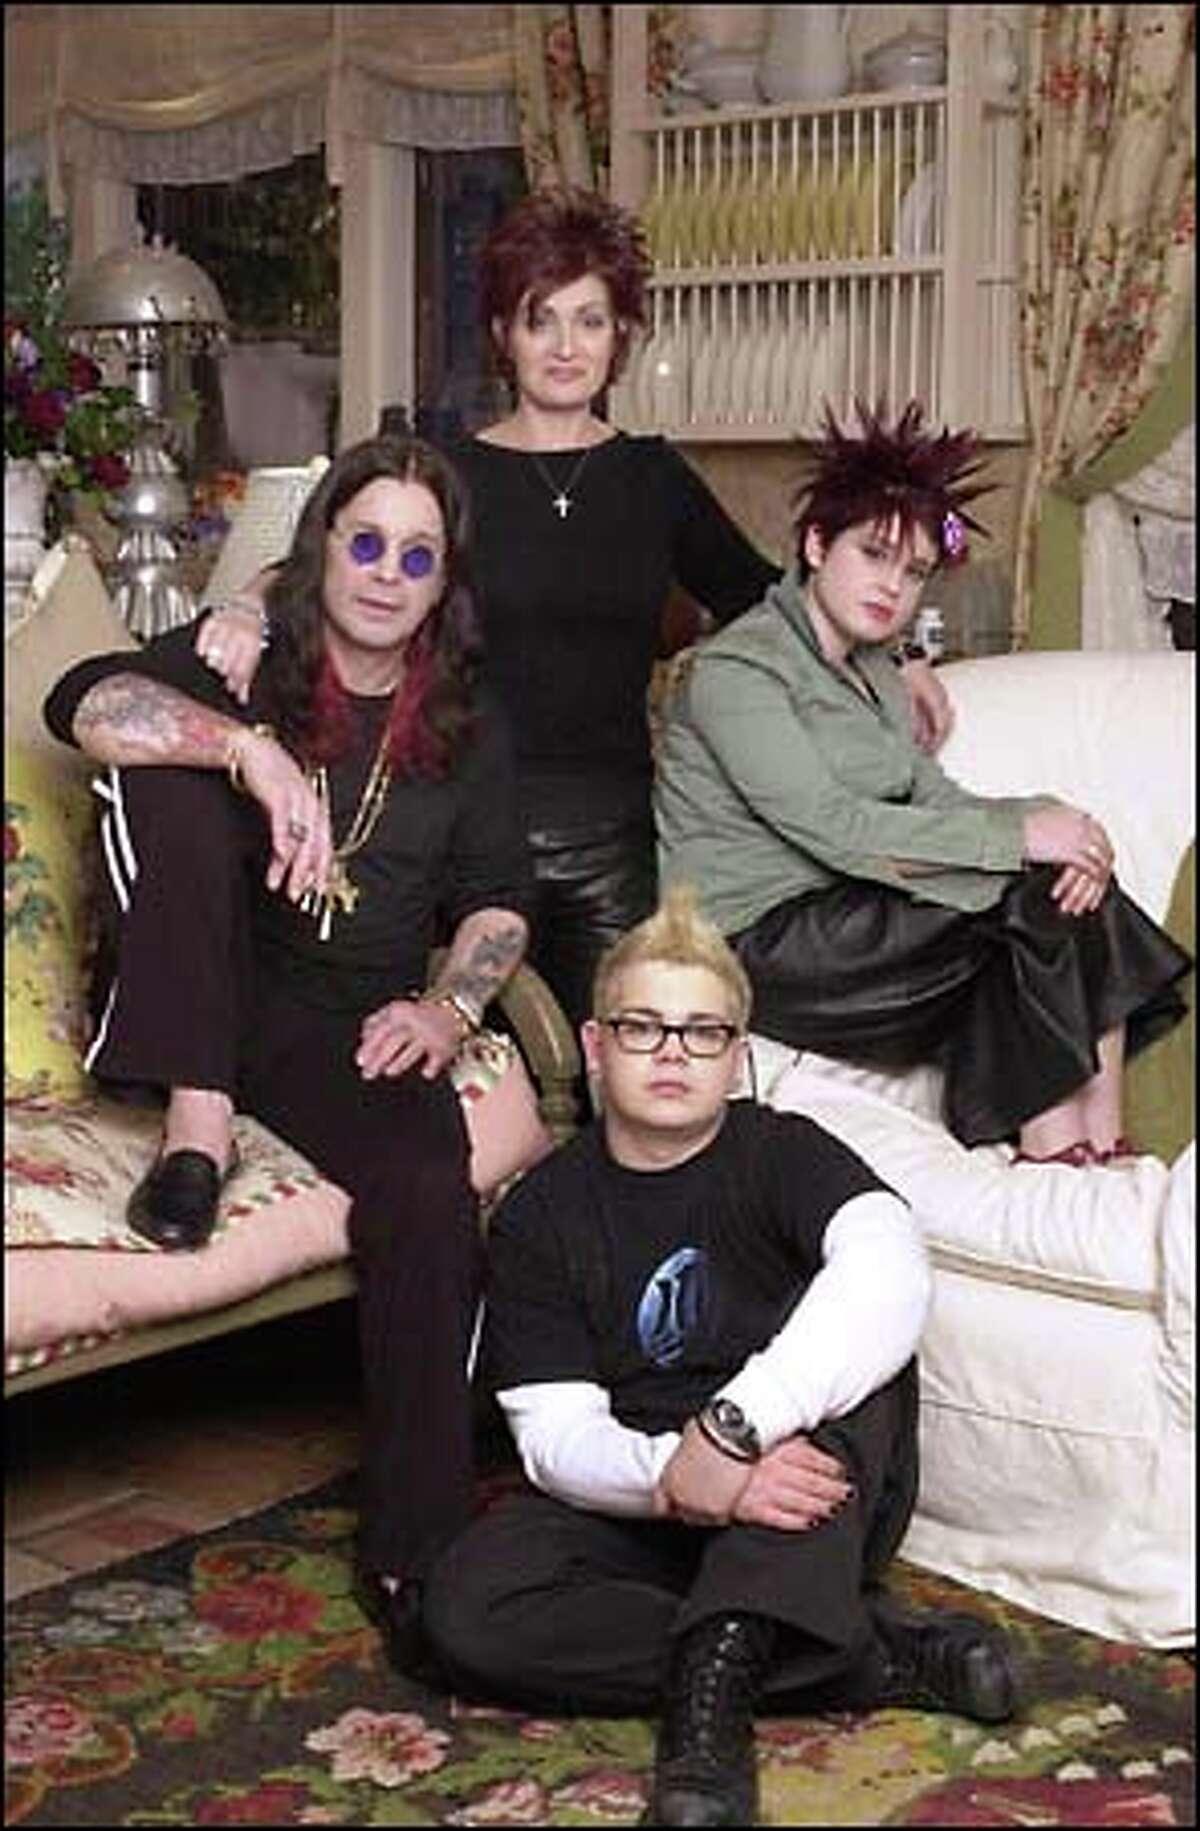 With a whole lotta (bleeping) going on, MTV chronicles the daily existence of a rock 'n' roll family in "The Osbournes," featuring Ozzy Osbourne, left, wife Sharon, standing, daughter Kelly and son Jack. In this household, the f-word is just another parenting tool.